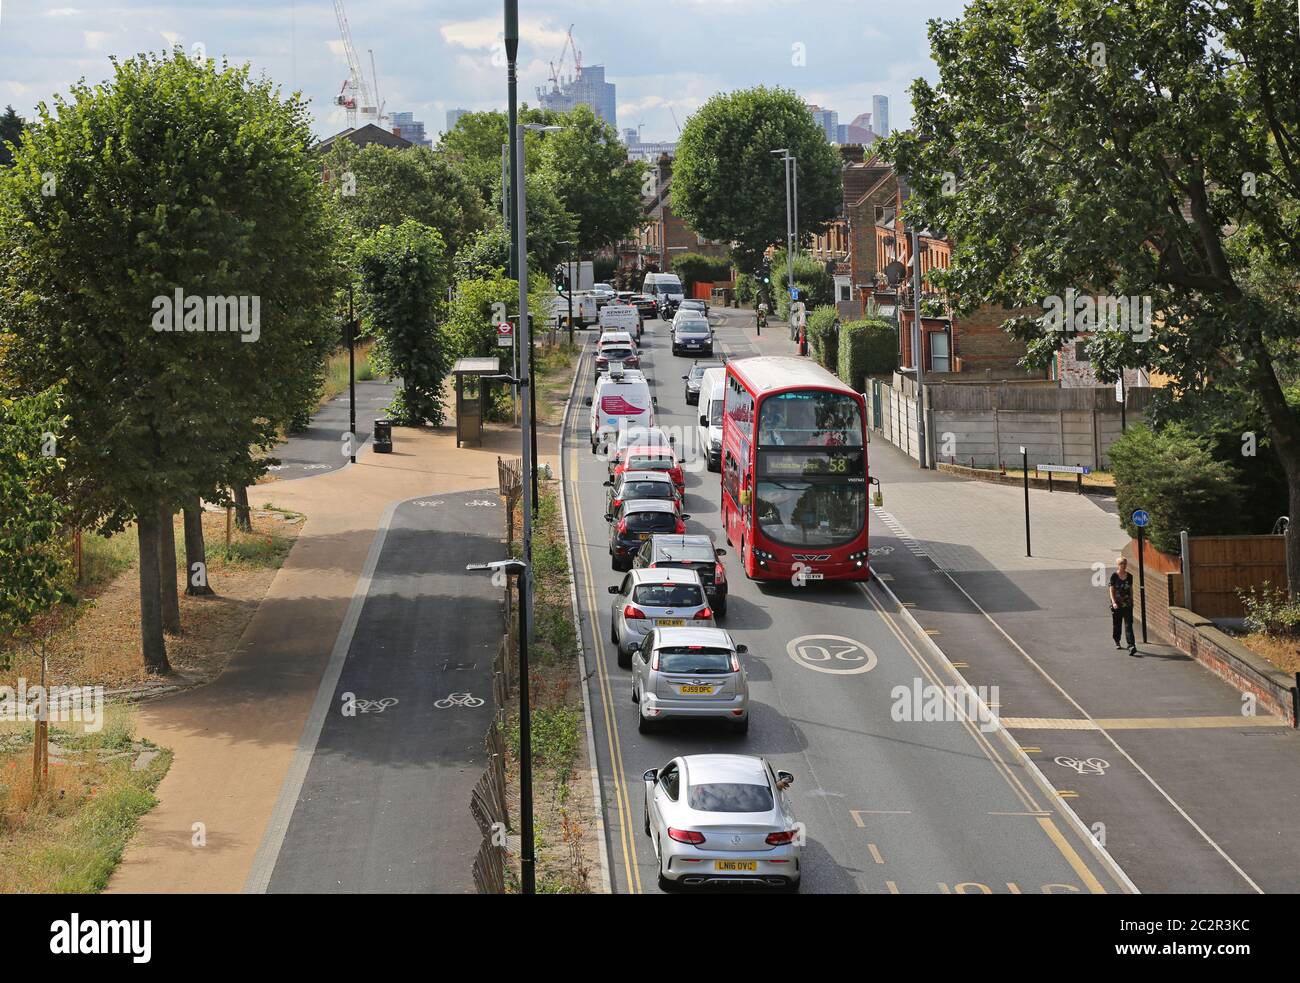 High level view of Markhouse Road, Walthamstow, showing new cycle paths installed as part of Waltham Forest's Mini-Holland programme. Stock Photo